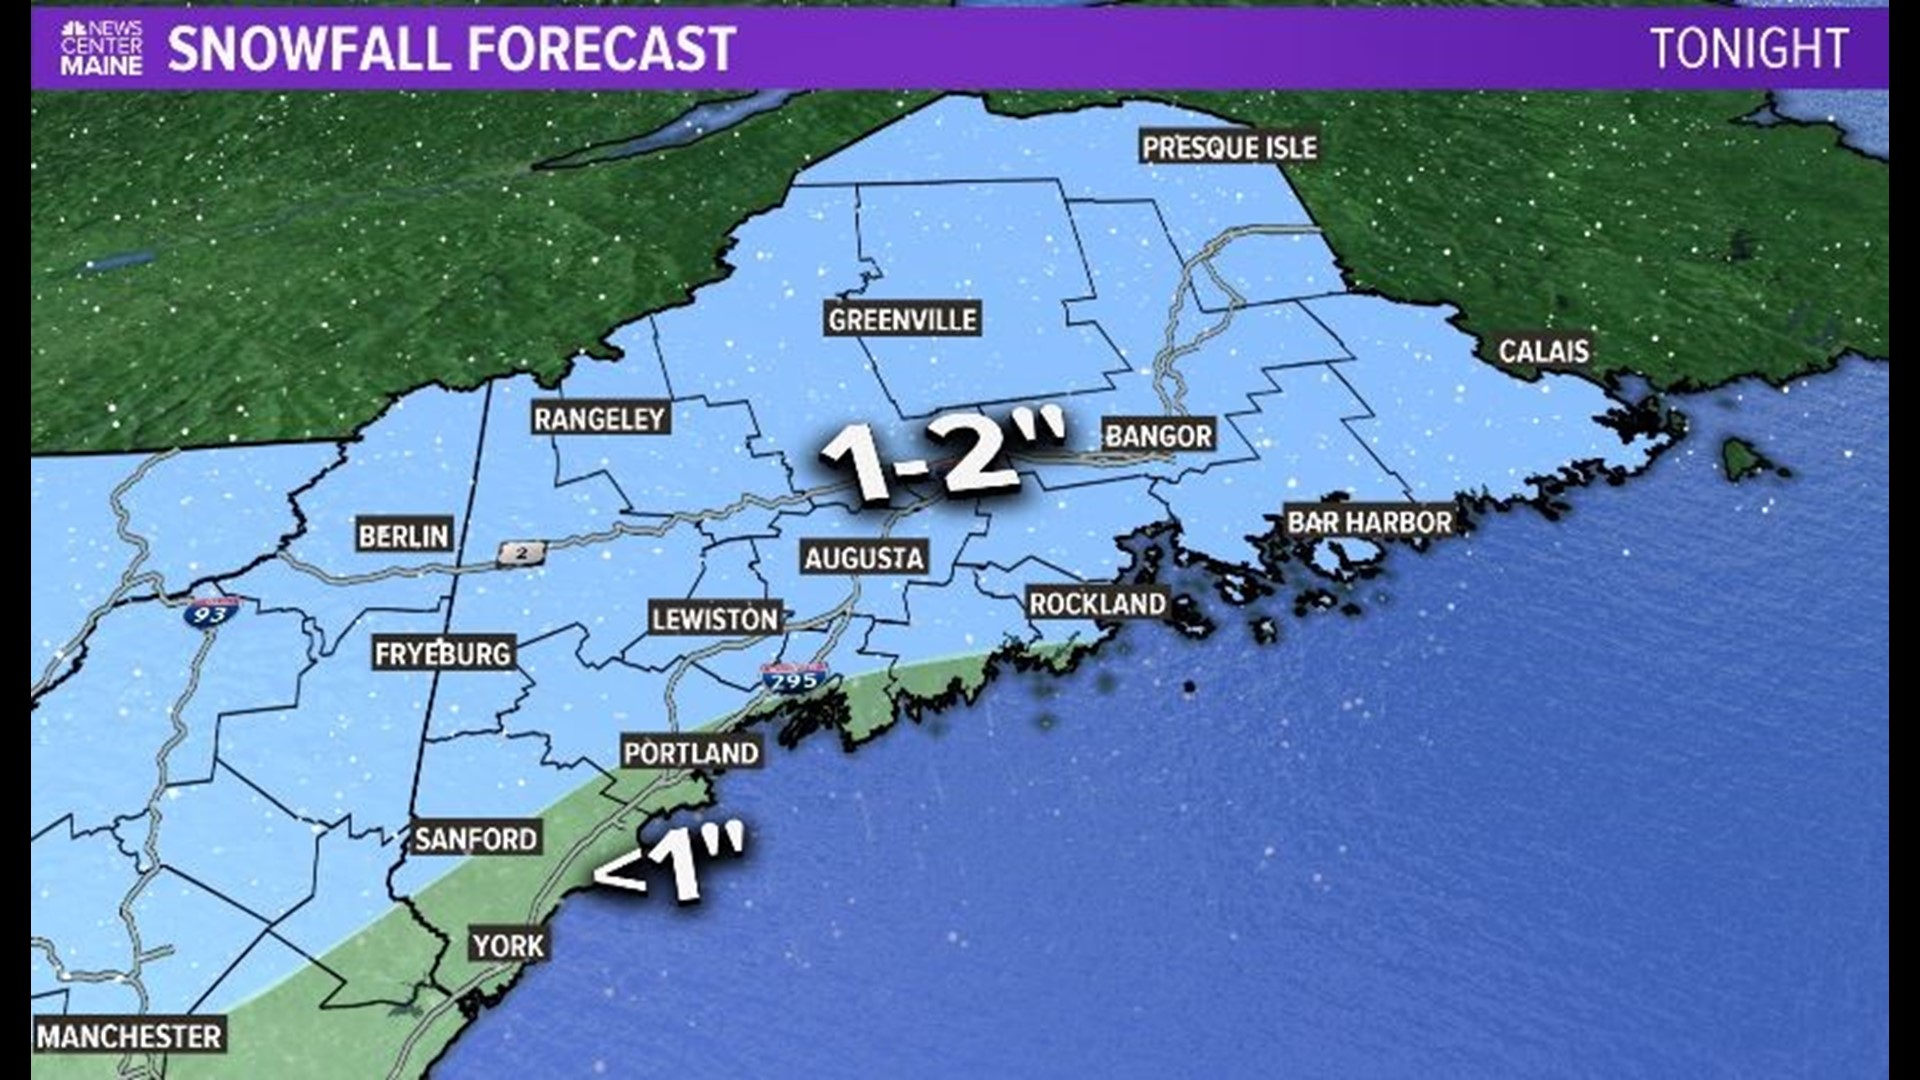 Lots of possibilities for this week's Maine weather